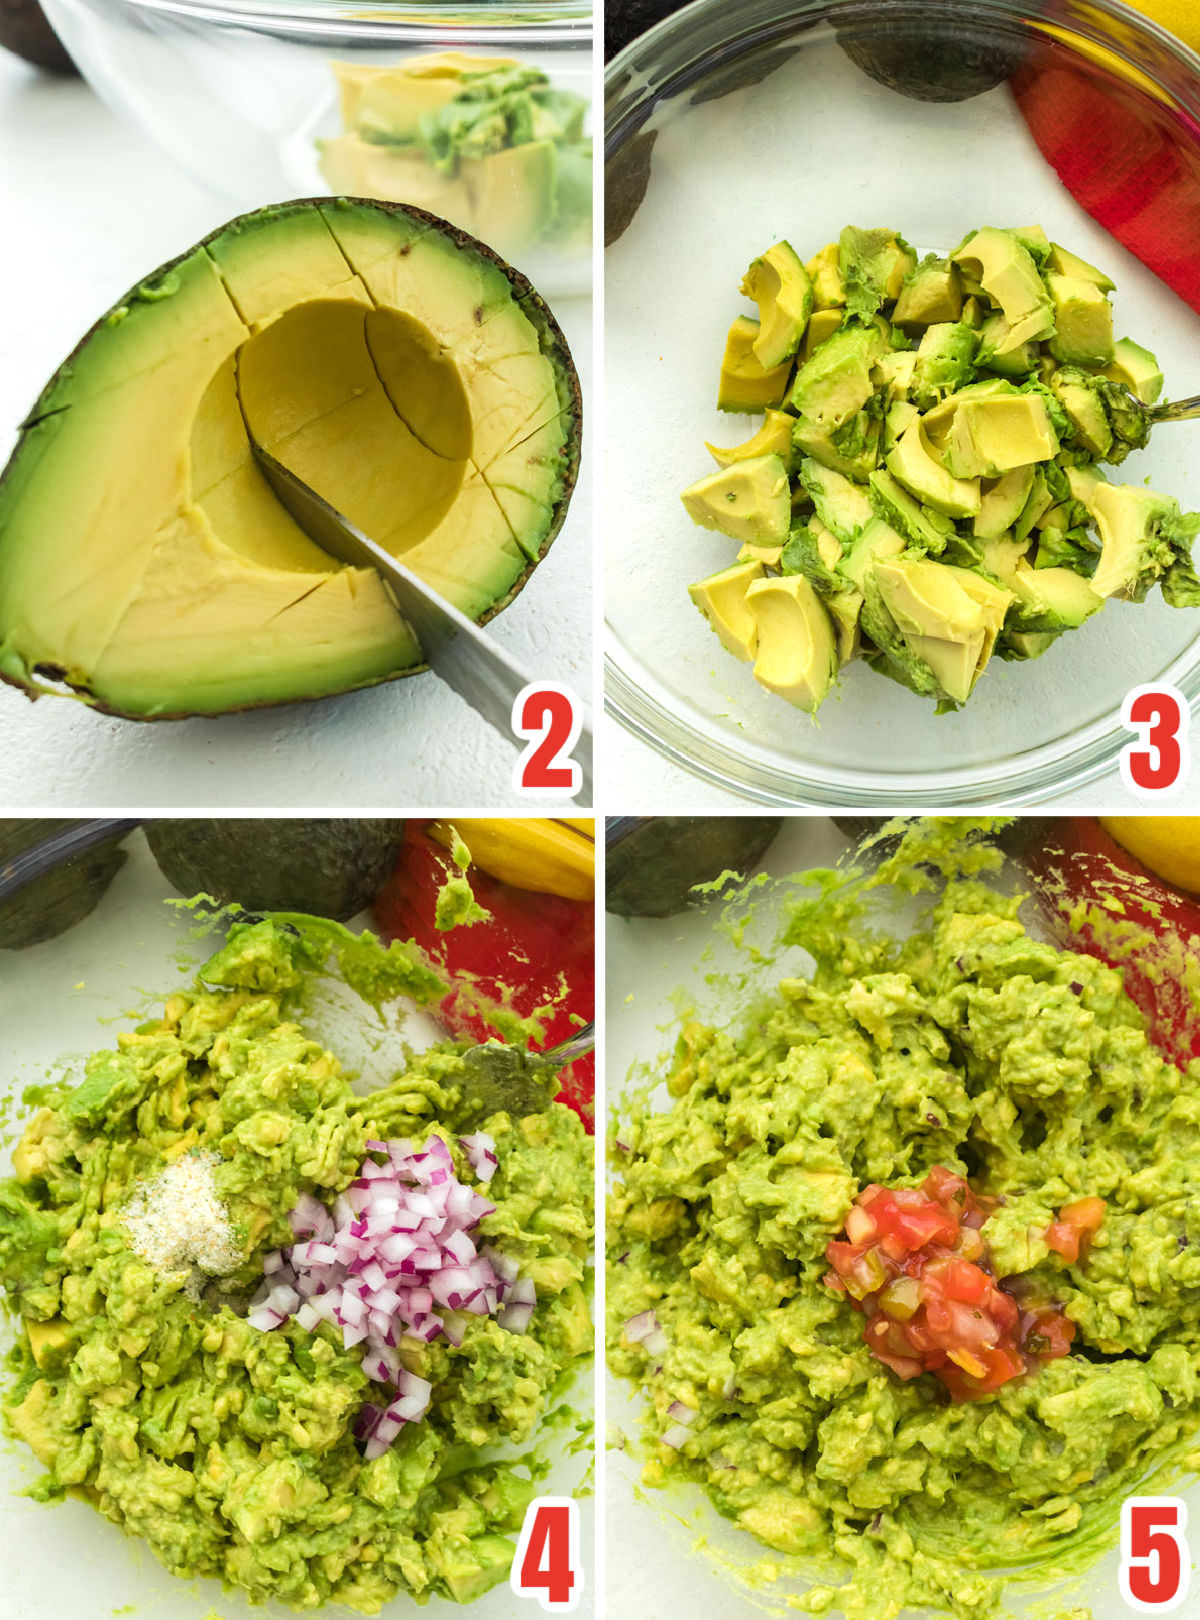 Collage image showing the steps for making Easy Homemade Guacamole.